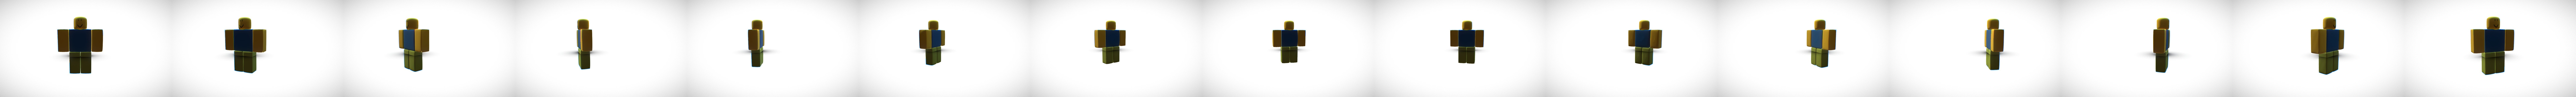 Roblox Noob High Poly 3d Model By Mrscottypieey Minecraftgamerpc64 5a1e6f9 Sketchfab - accurate roblox noob model for anim8or 3d models